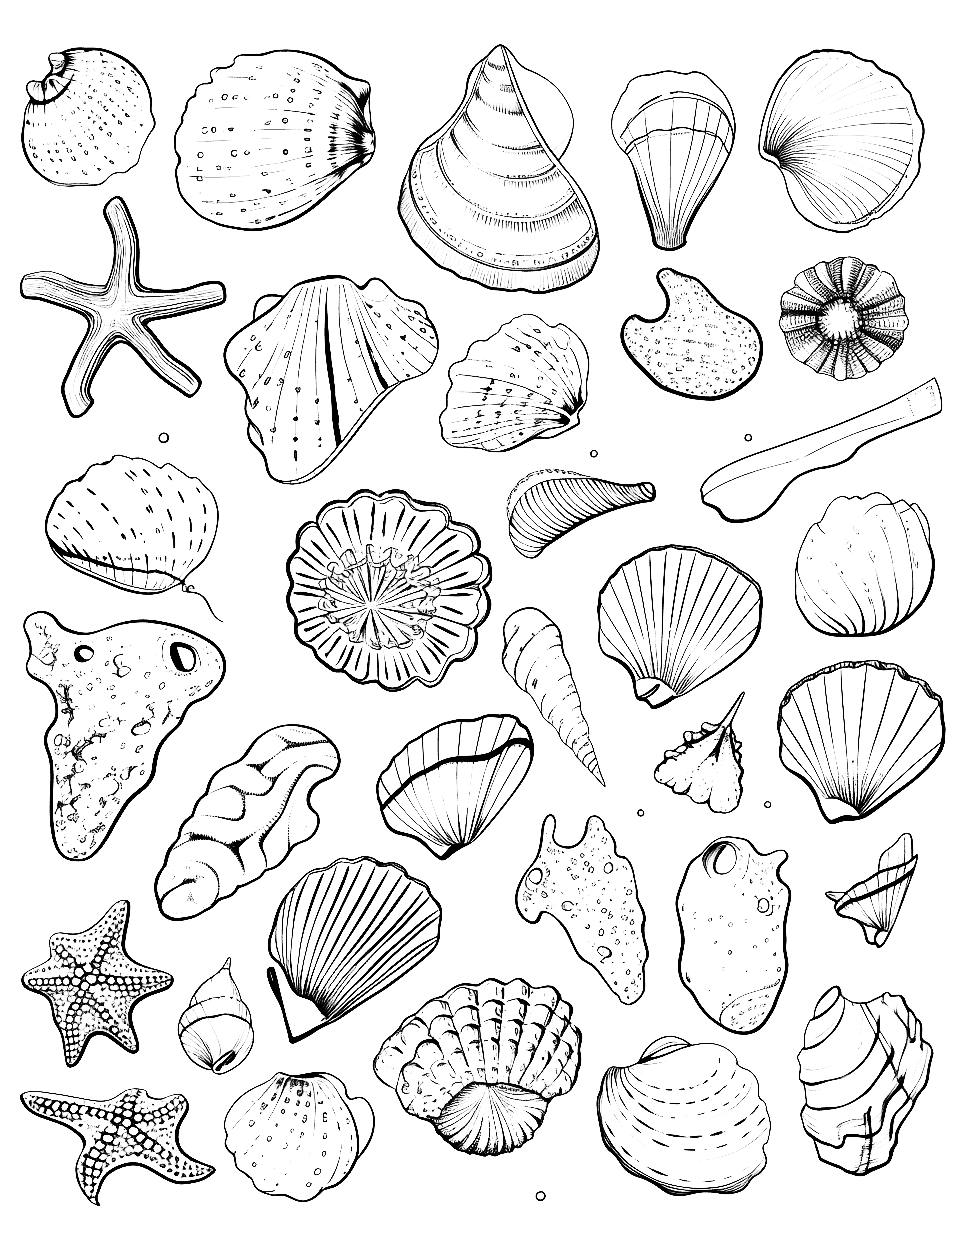 Coastal Seashell Collection Adult Coloring Page - An array of seashells scattered along the sandy beach.